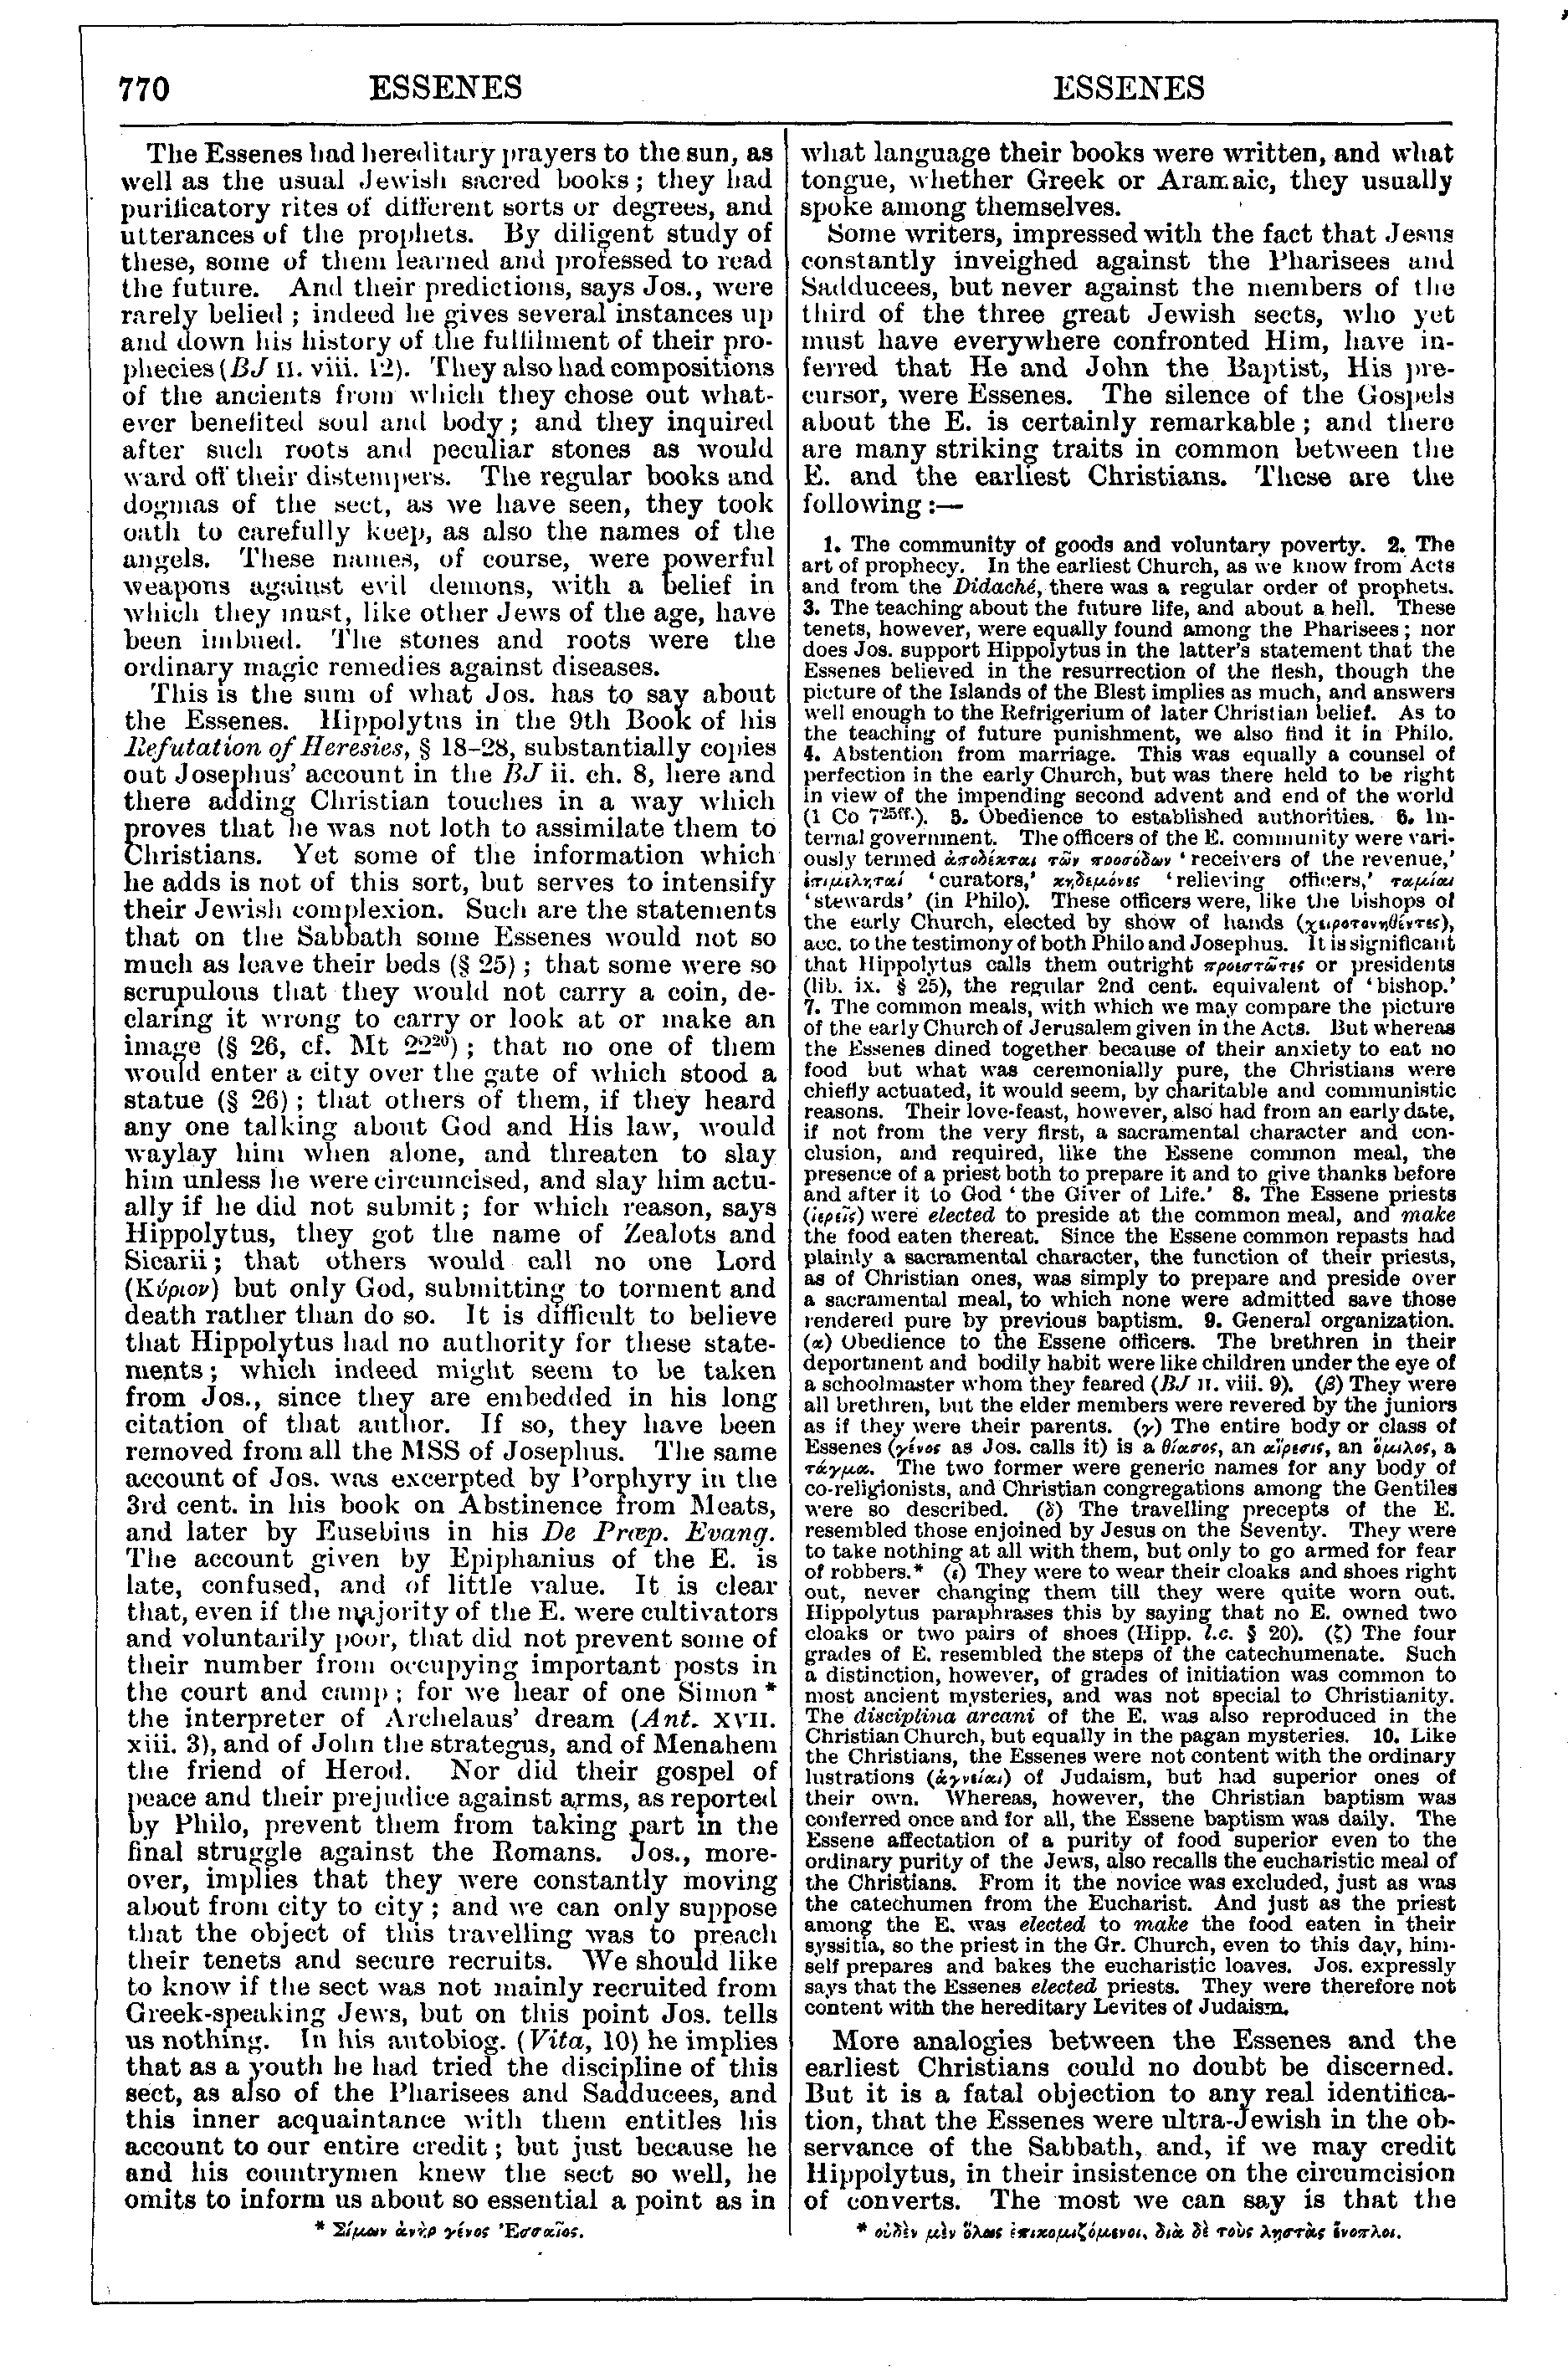 Image of page 770